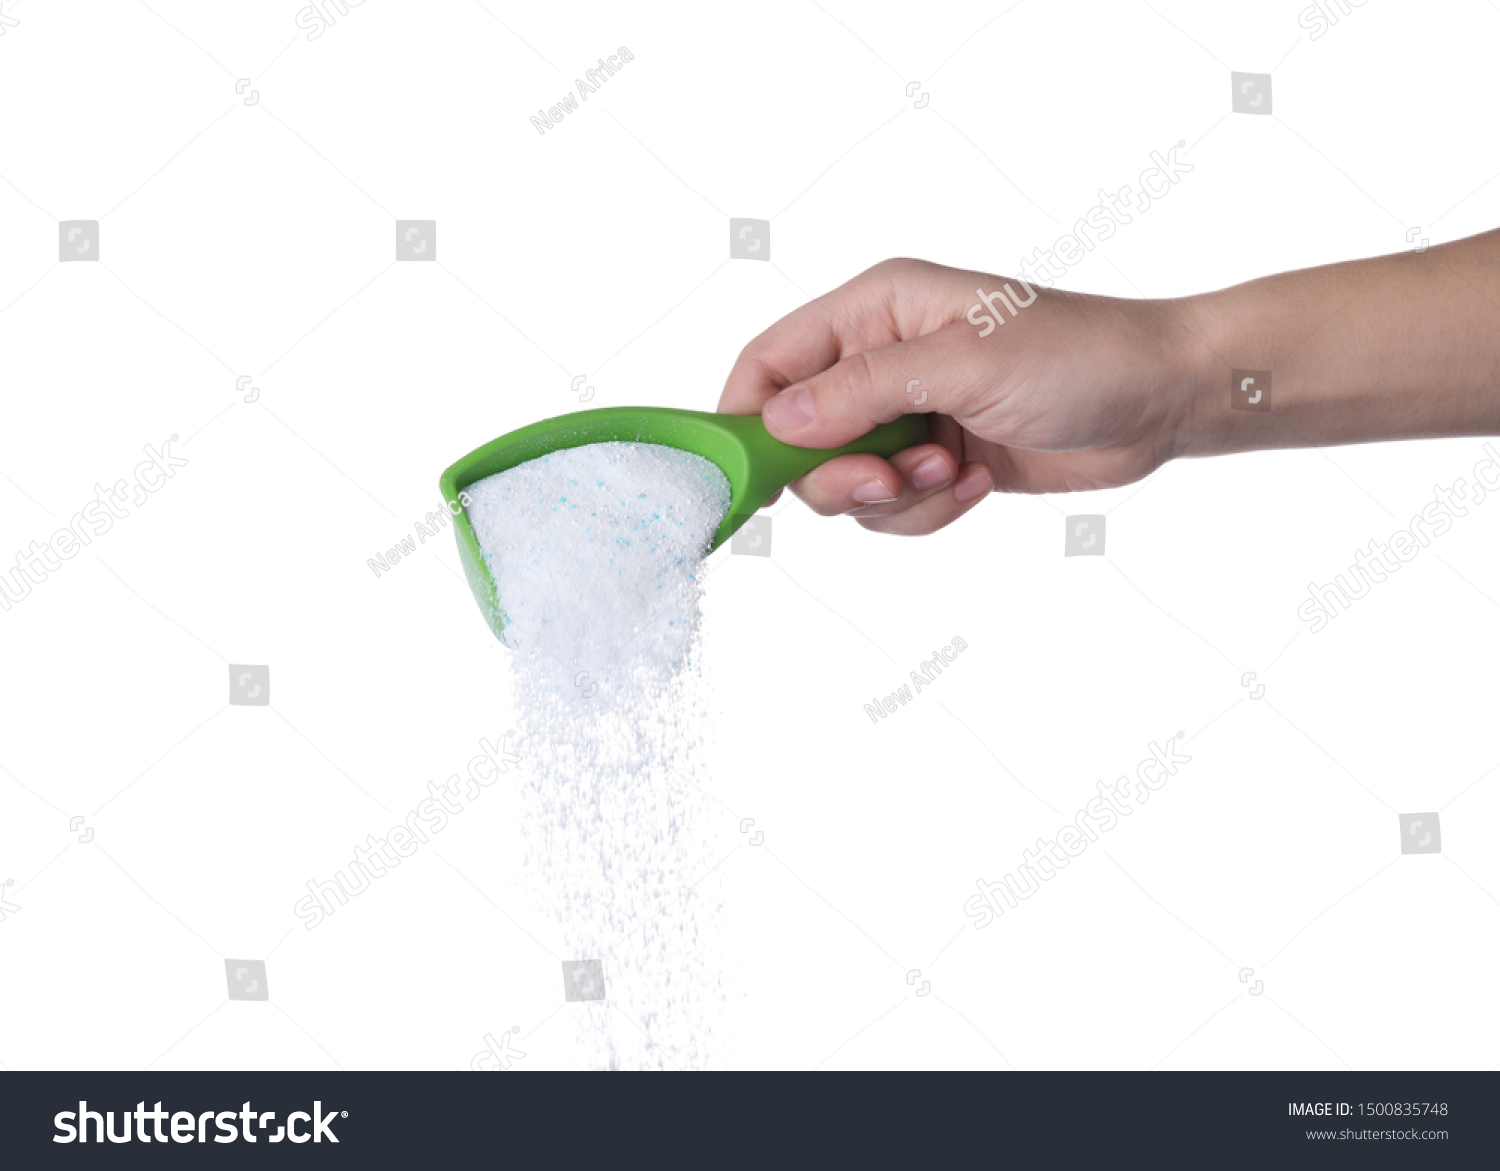 Woman pouring laundry detergent from measuring container against white background, closeup #1500835748